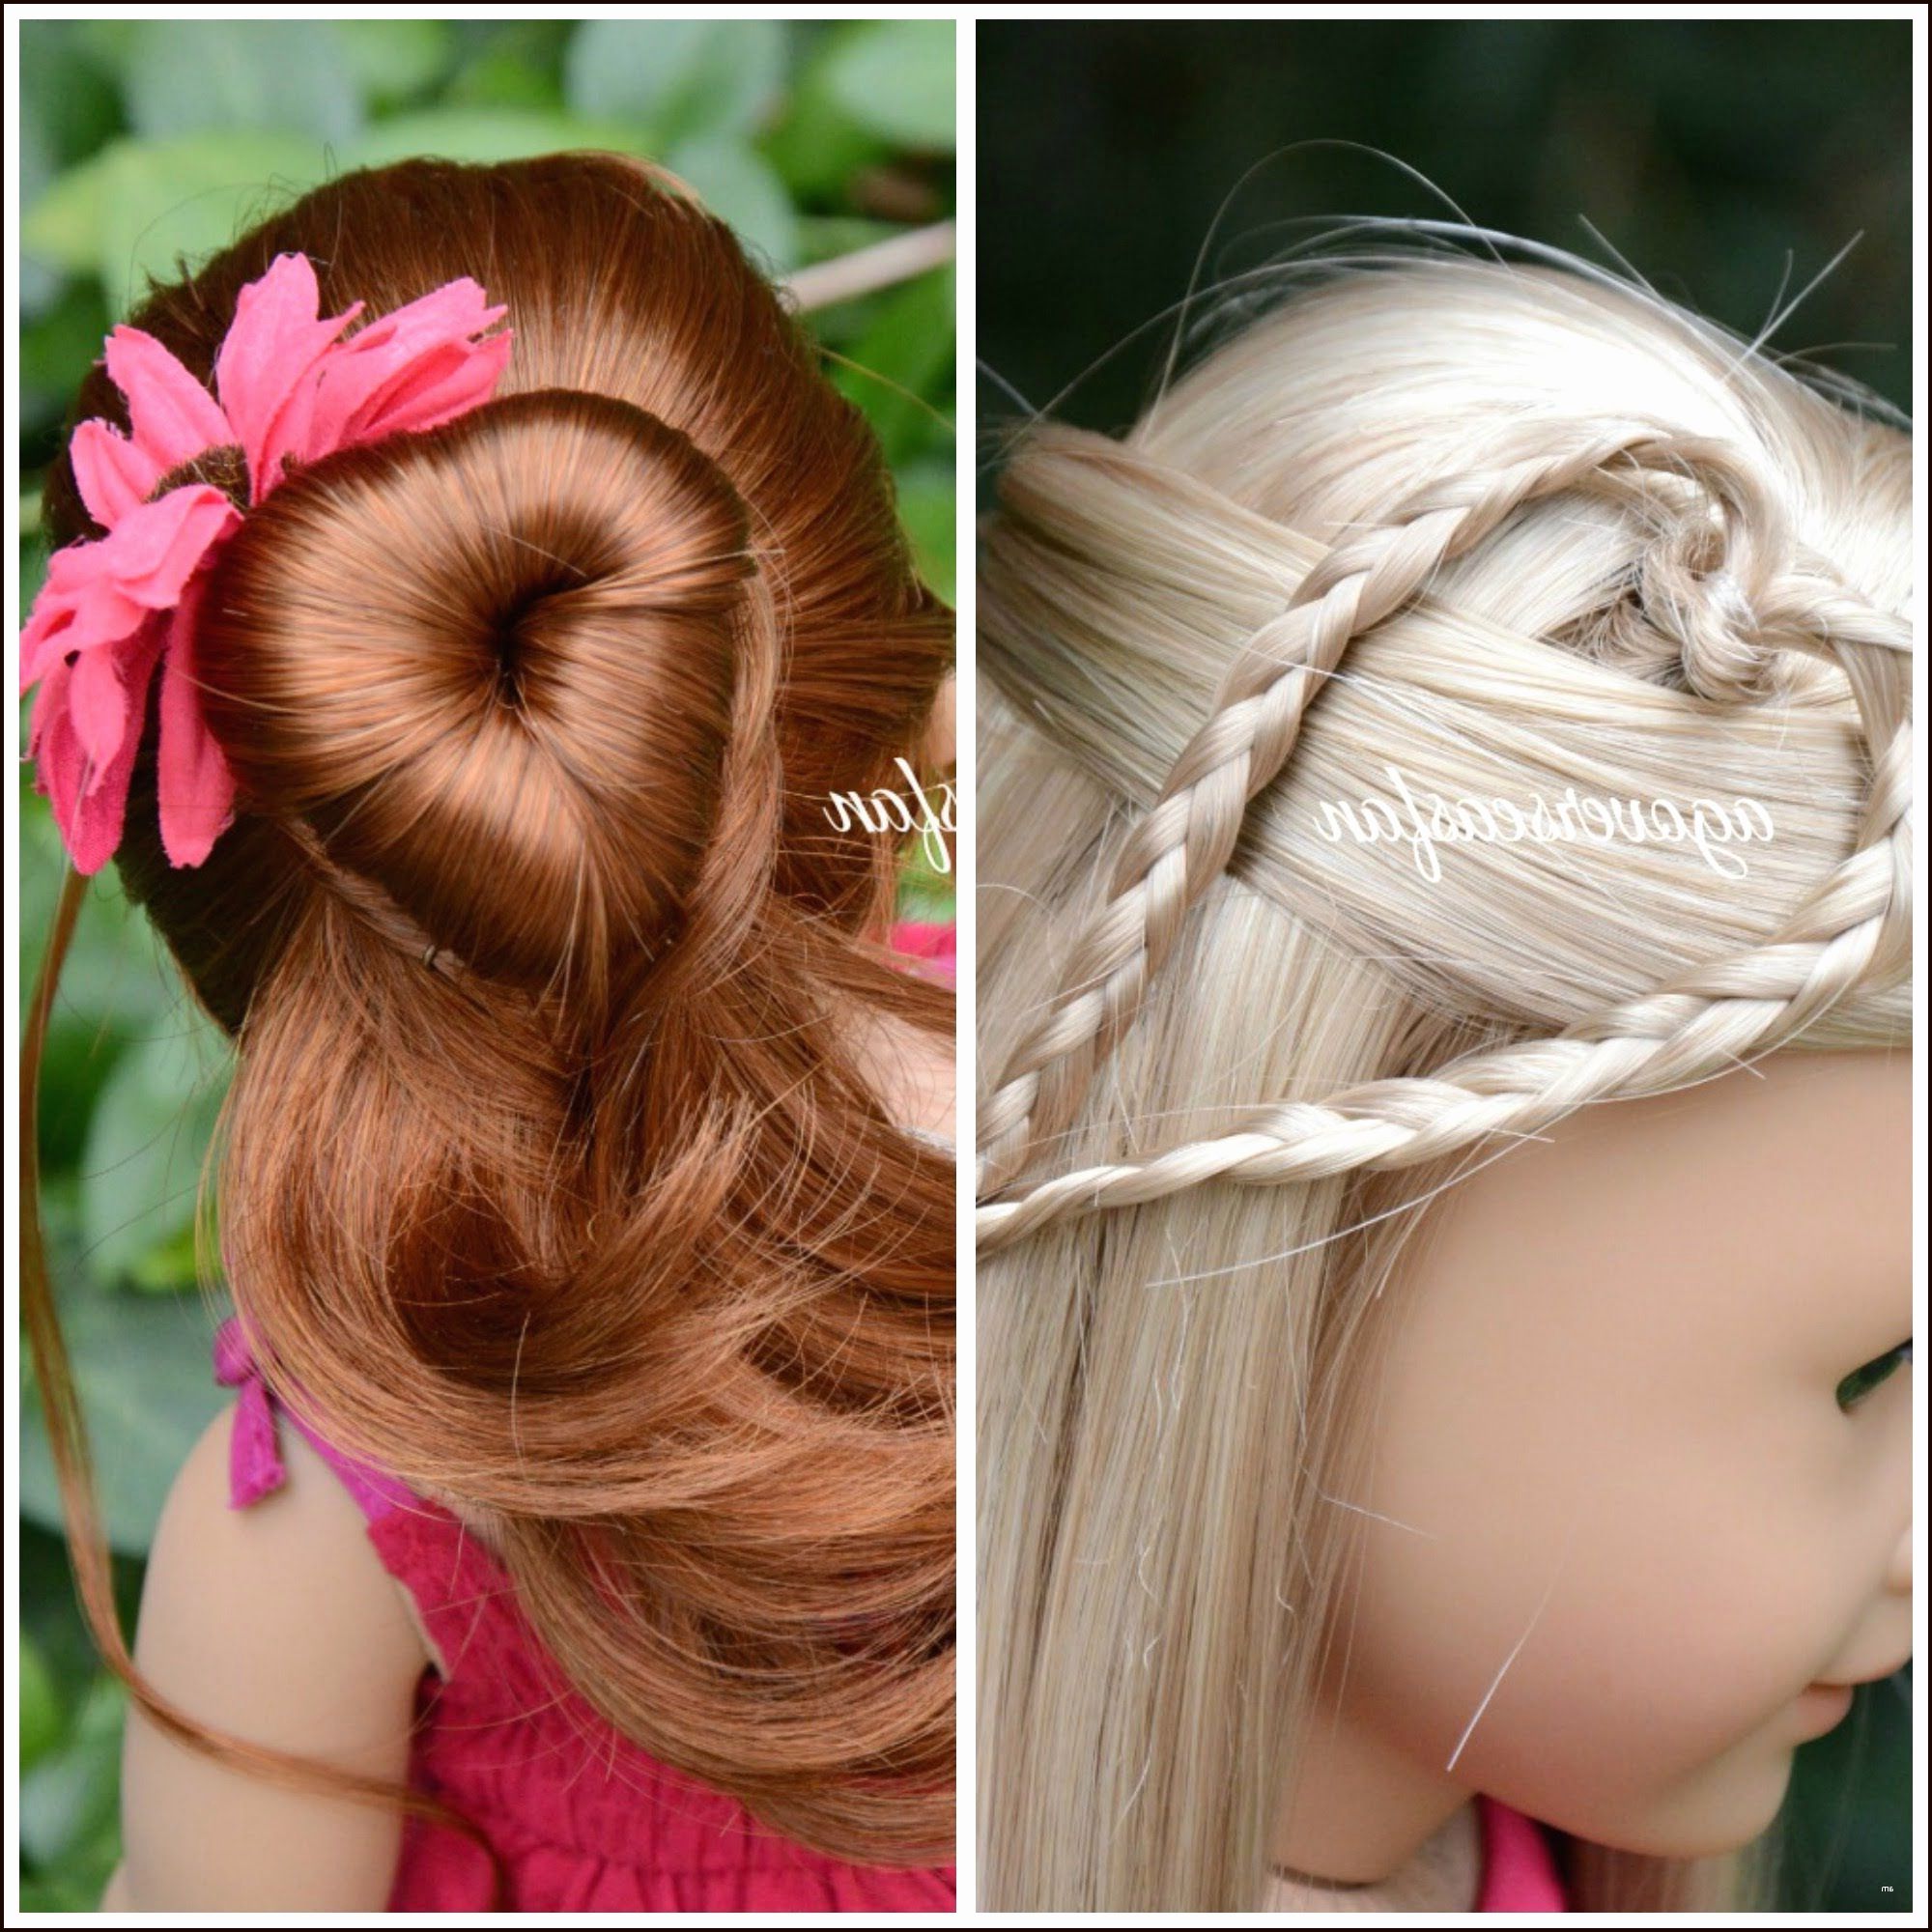 40 Marvelous Photos Of My Life Doll Hairstyles | Hairstyles Pertaining To Cute American Girl Doll Hairstyles For Short Hair (View 24 of 25)